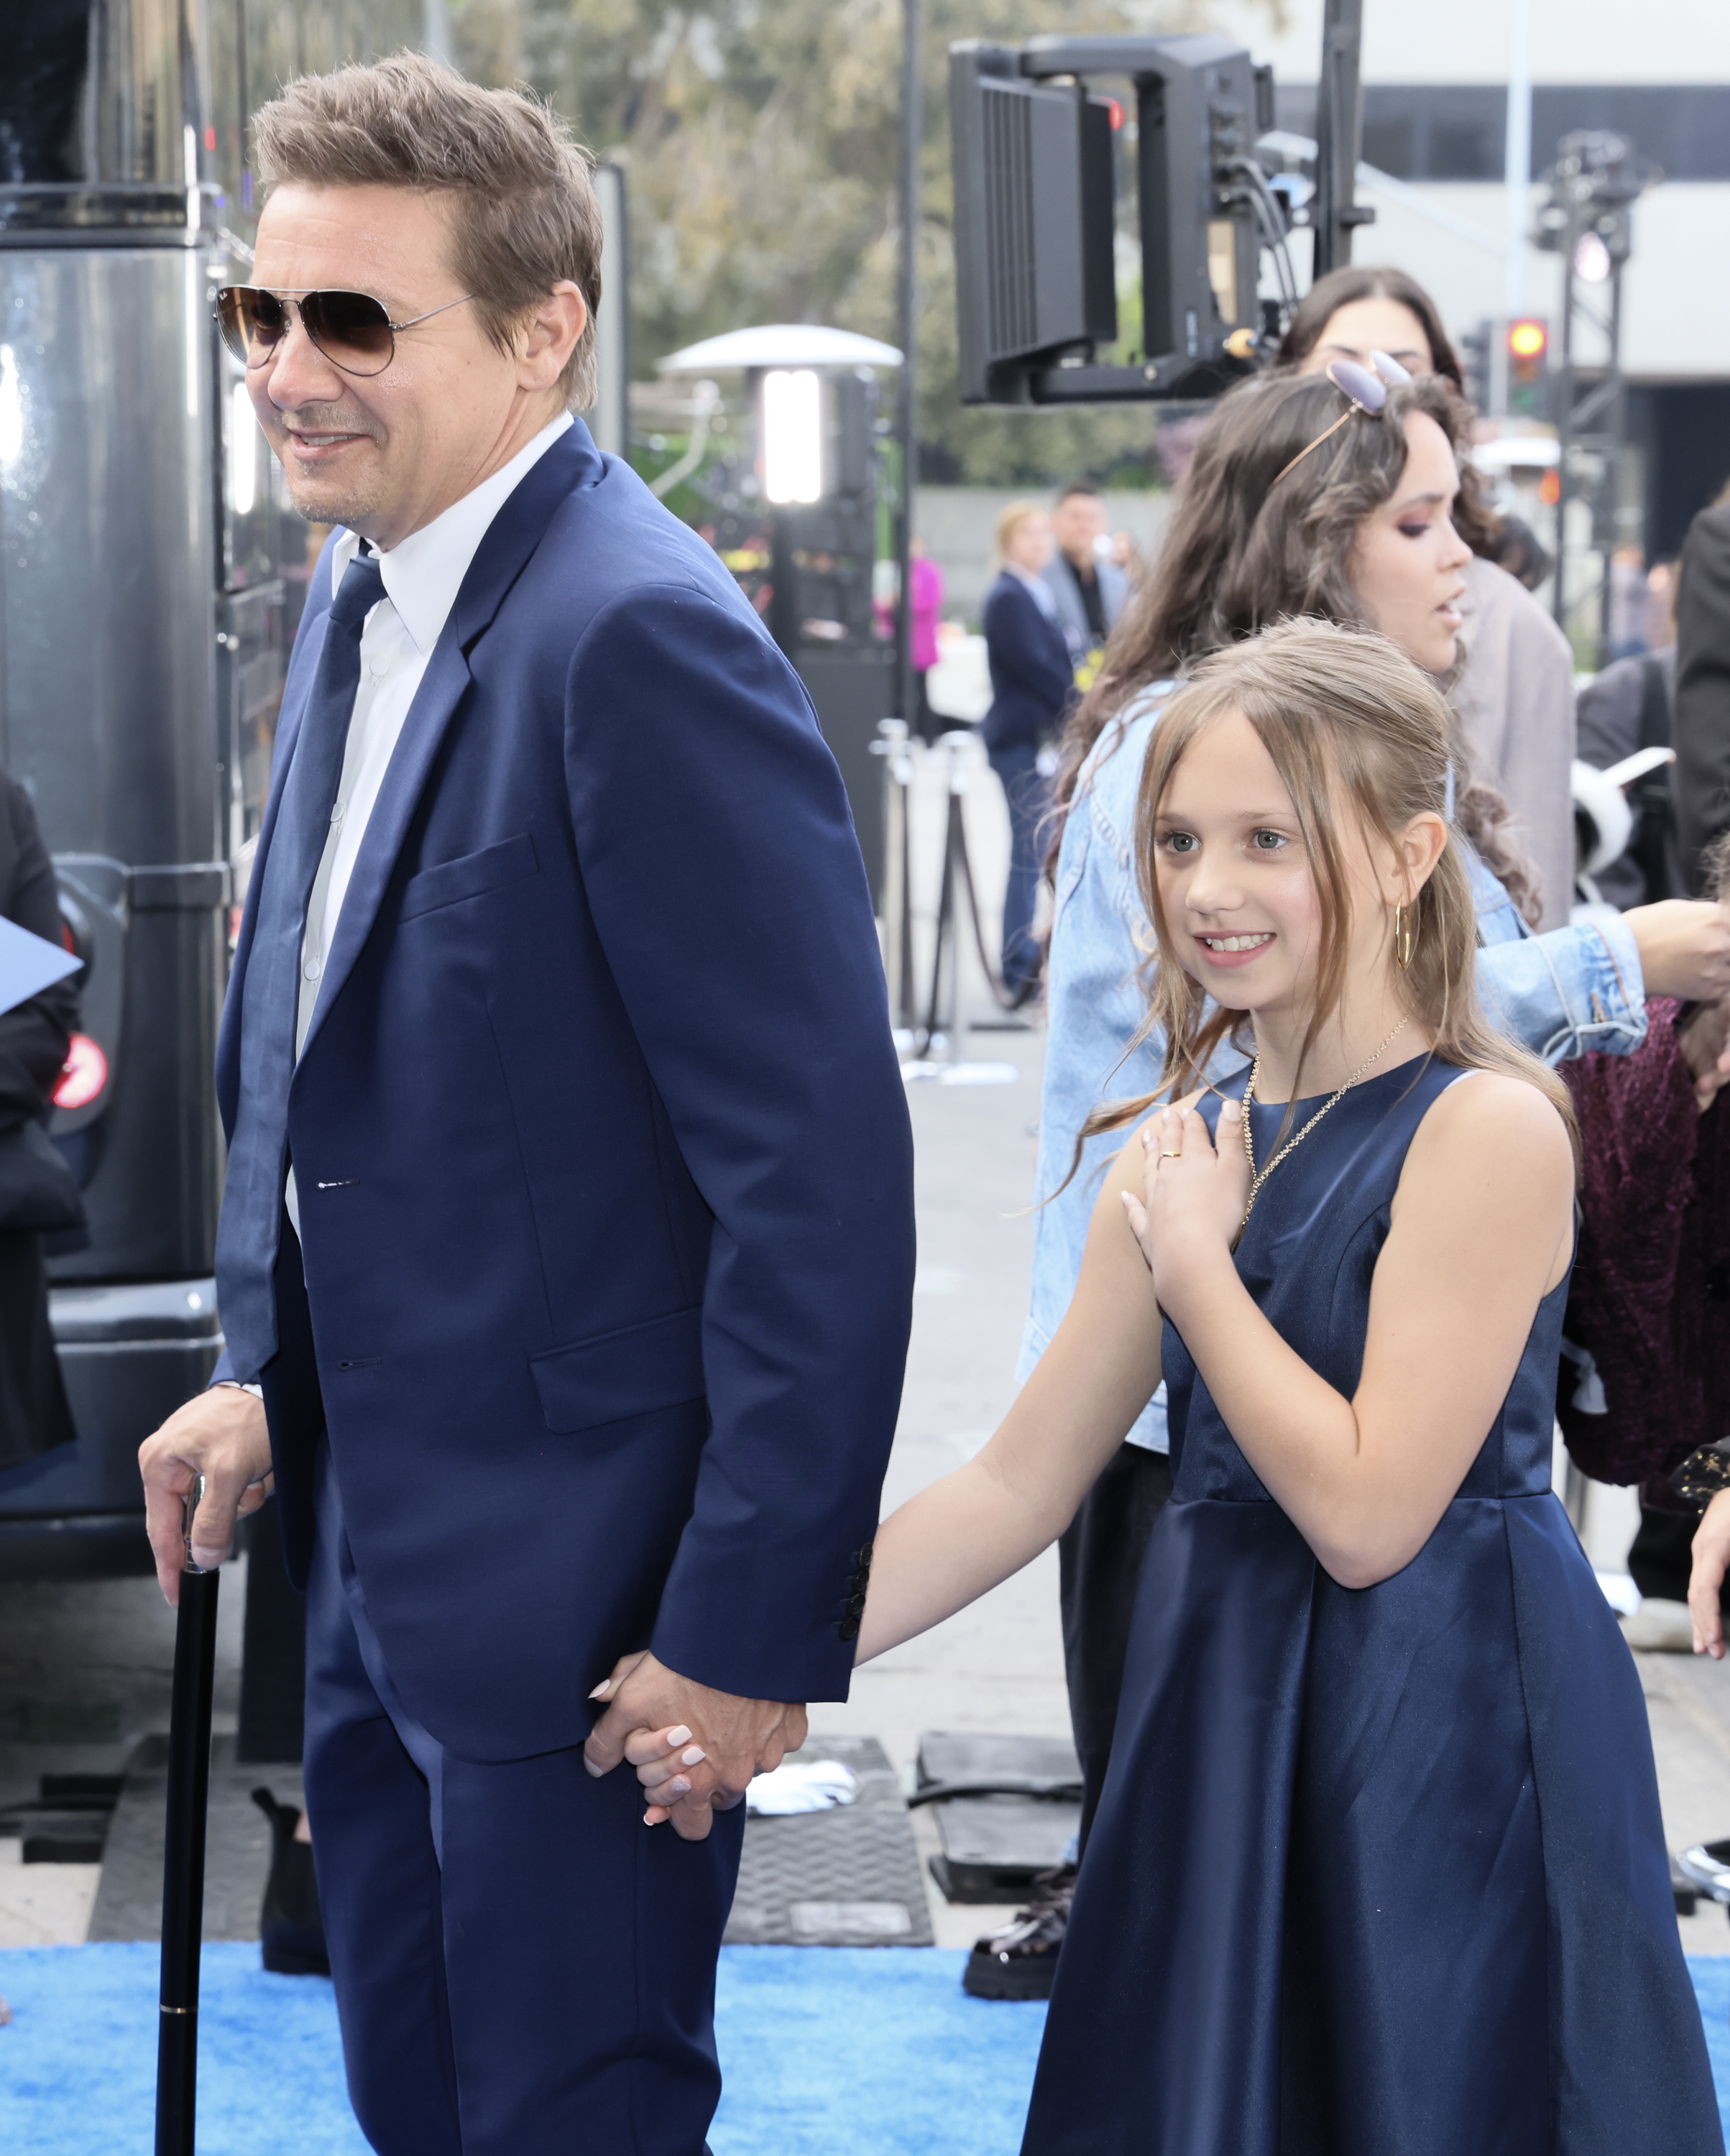 Jeremy Renner and his daughter, Ava Berlin, at the premiere of "Rennervations" in L.A. on April 11, 2023 | Source: Getty Images